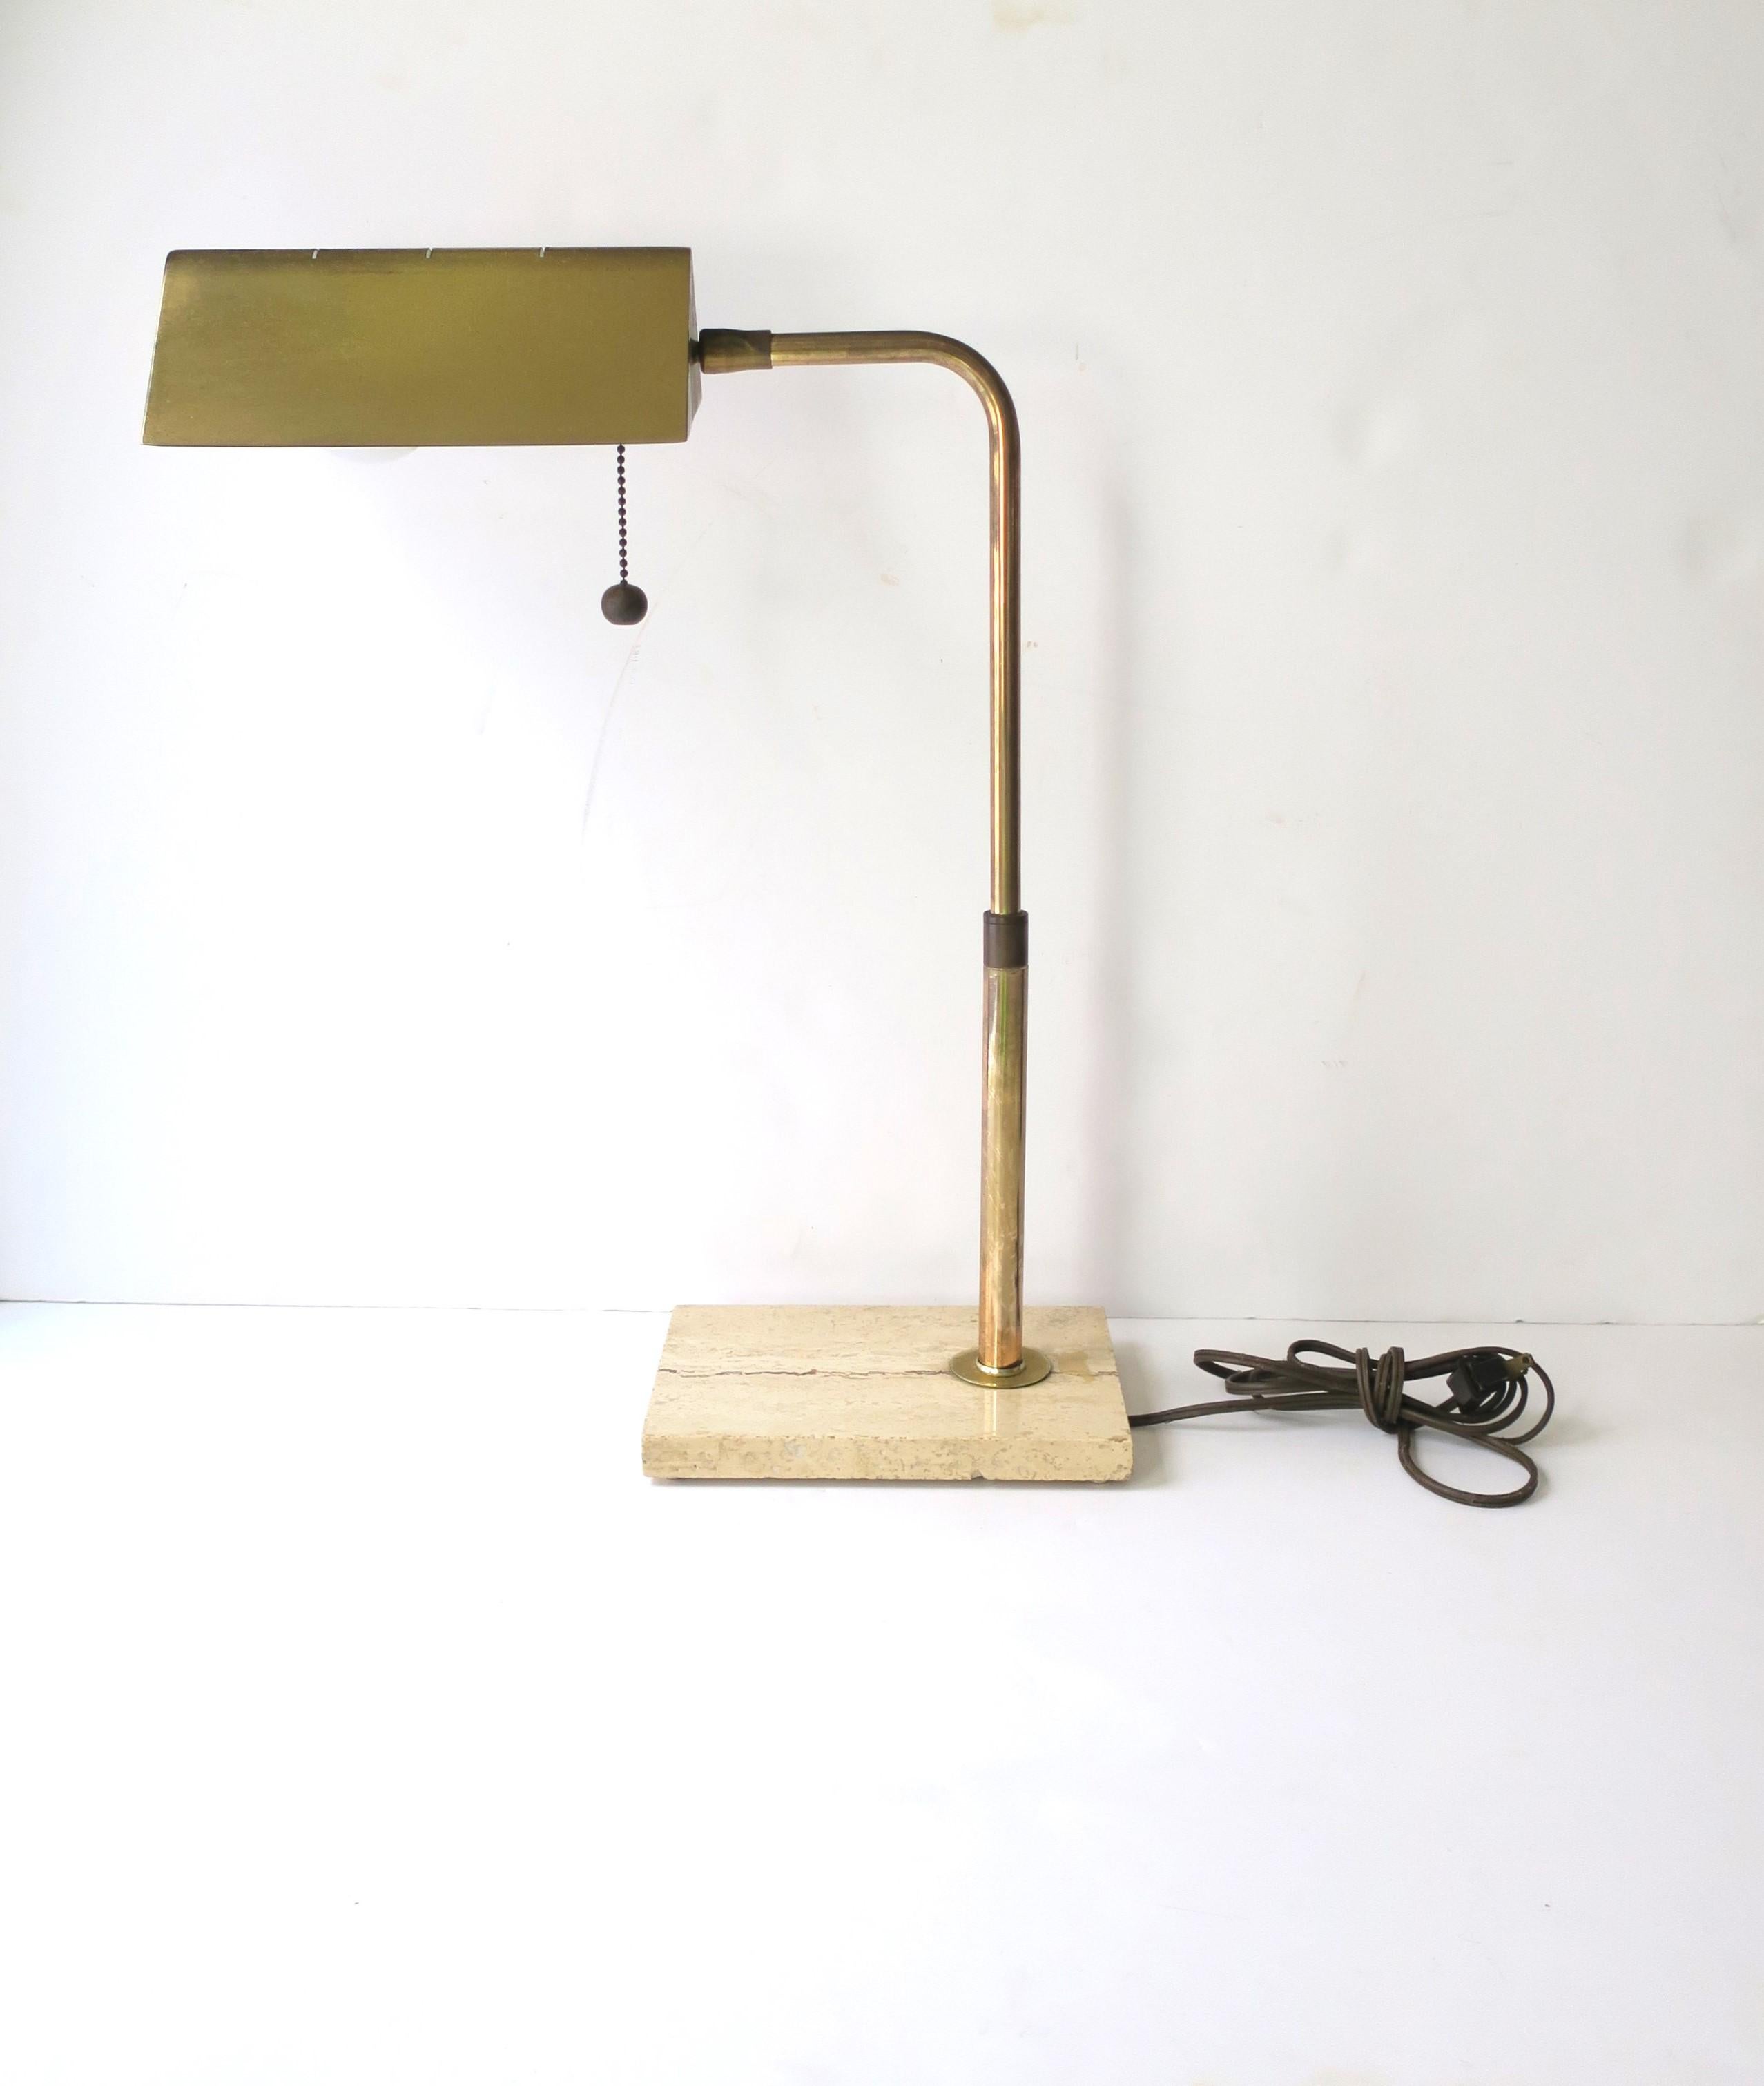 Italian Brass and Travertine Marble Desk or Table Lamp, circa 1960s 1970s In Good Condition For Sale In New York, NY